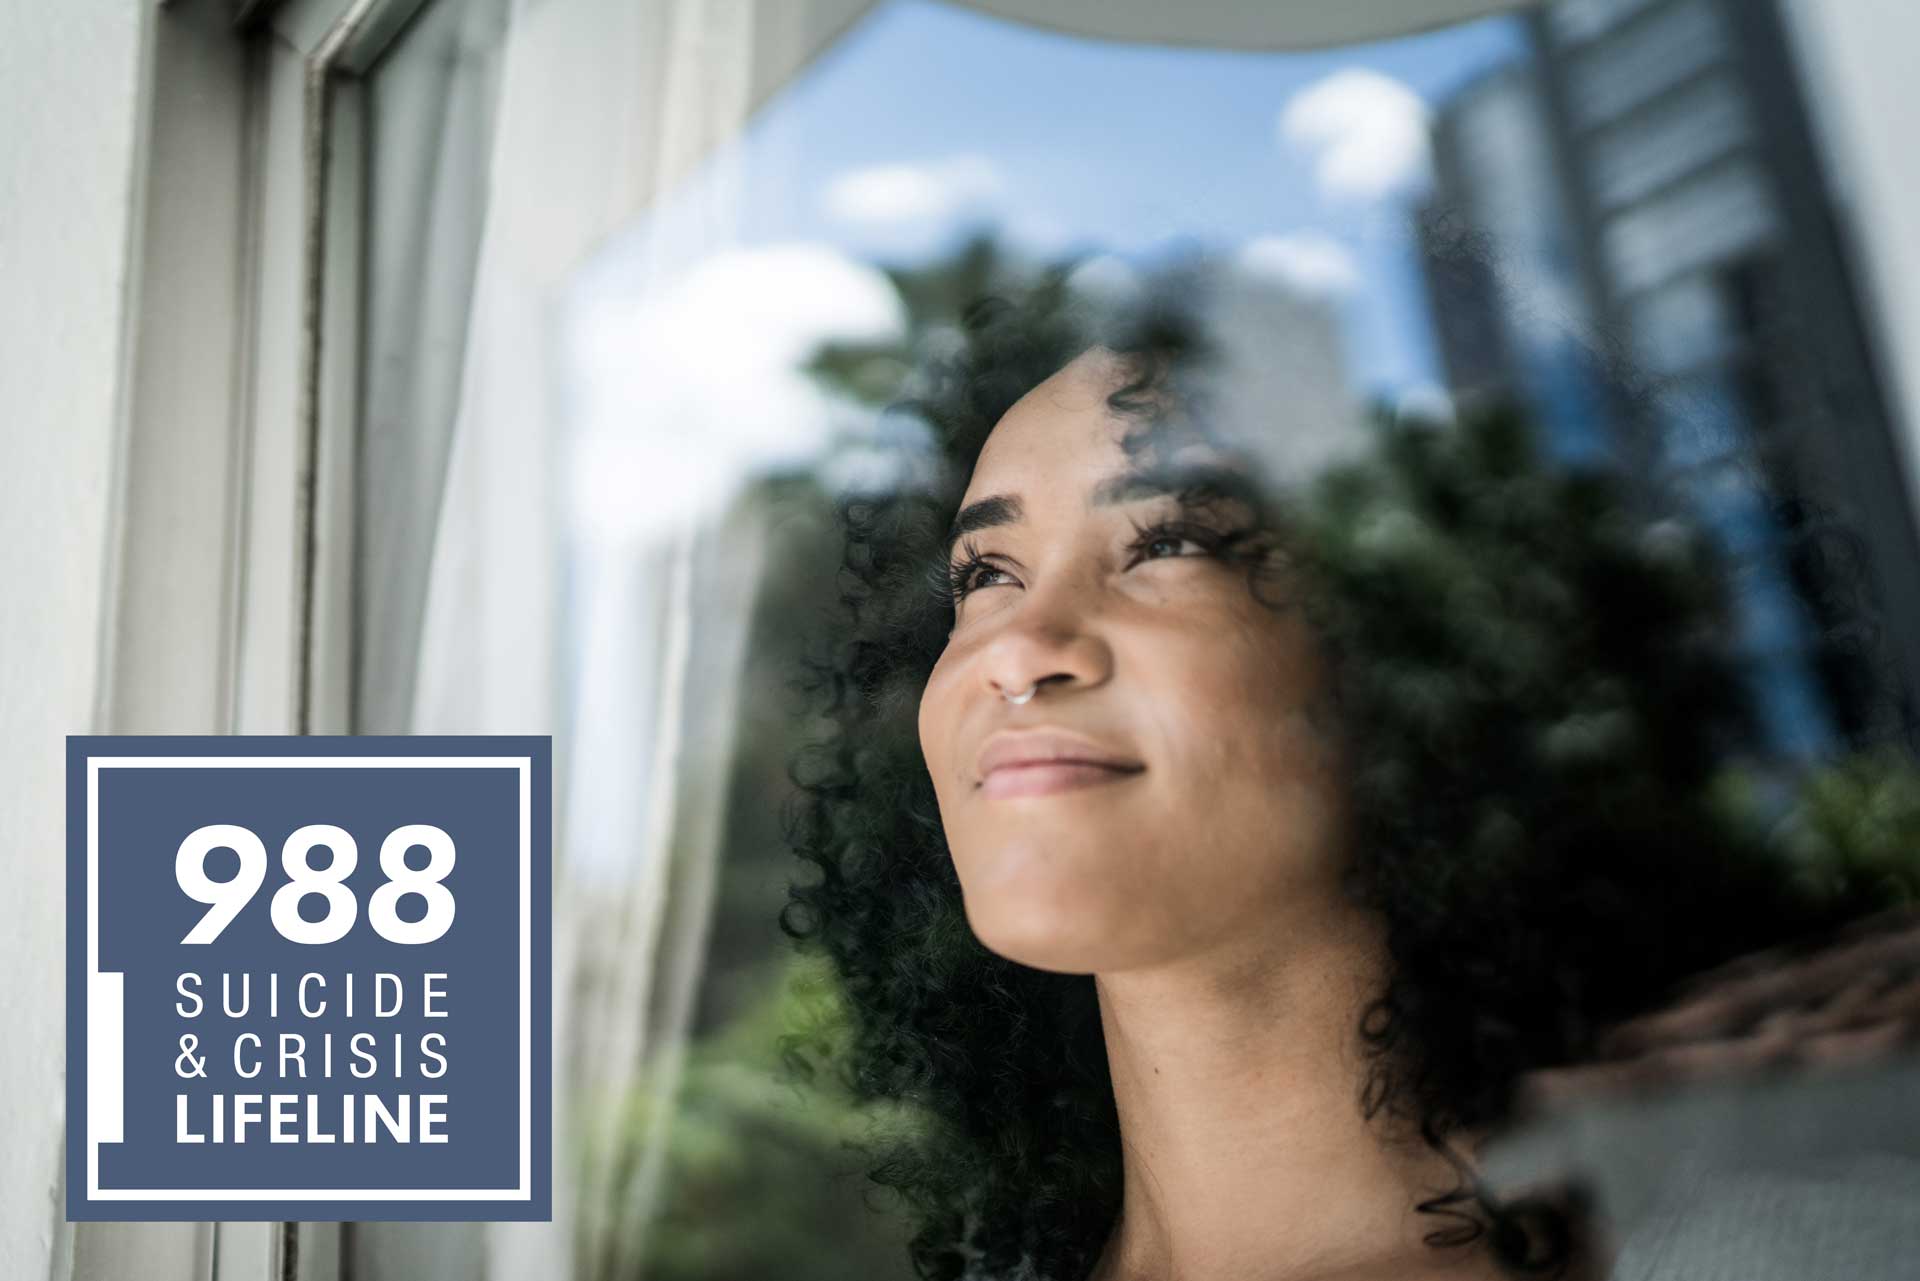 woman looking out a window with hopeful eyes and 988 suicide and crisis lifeline logo overlaid in bottom left of image